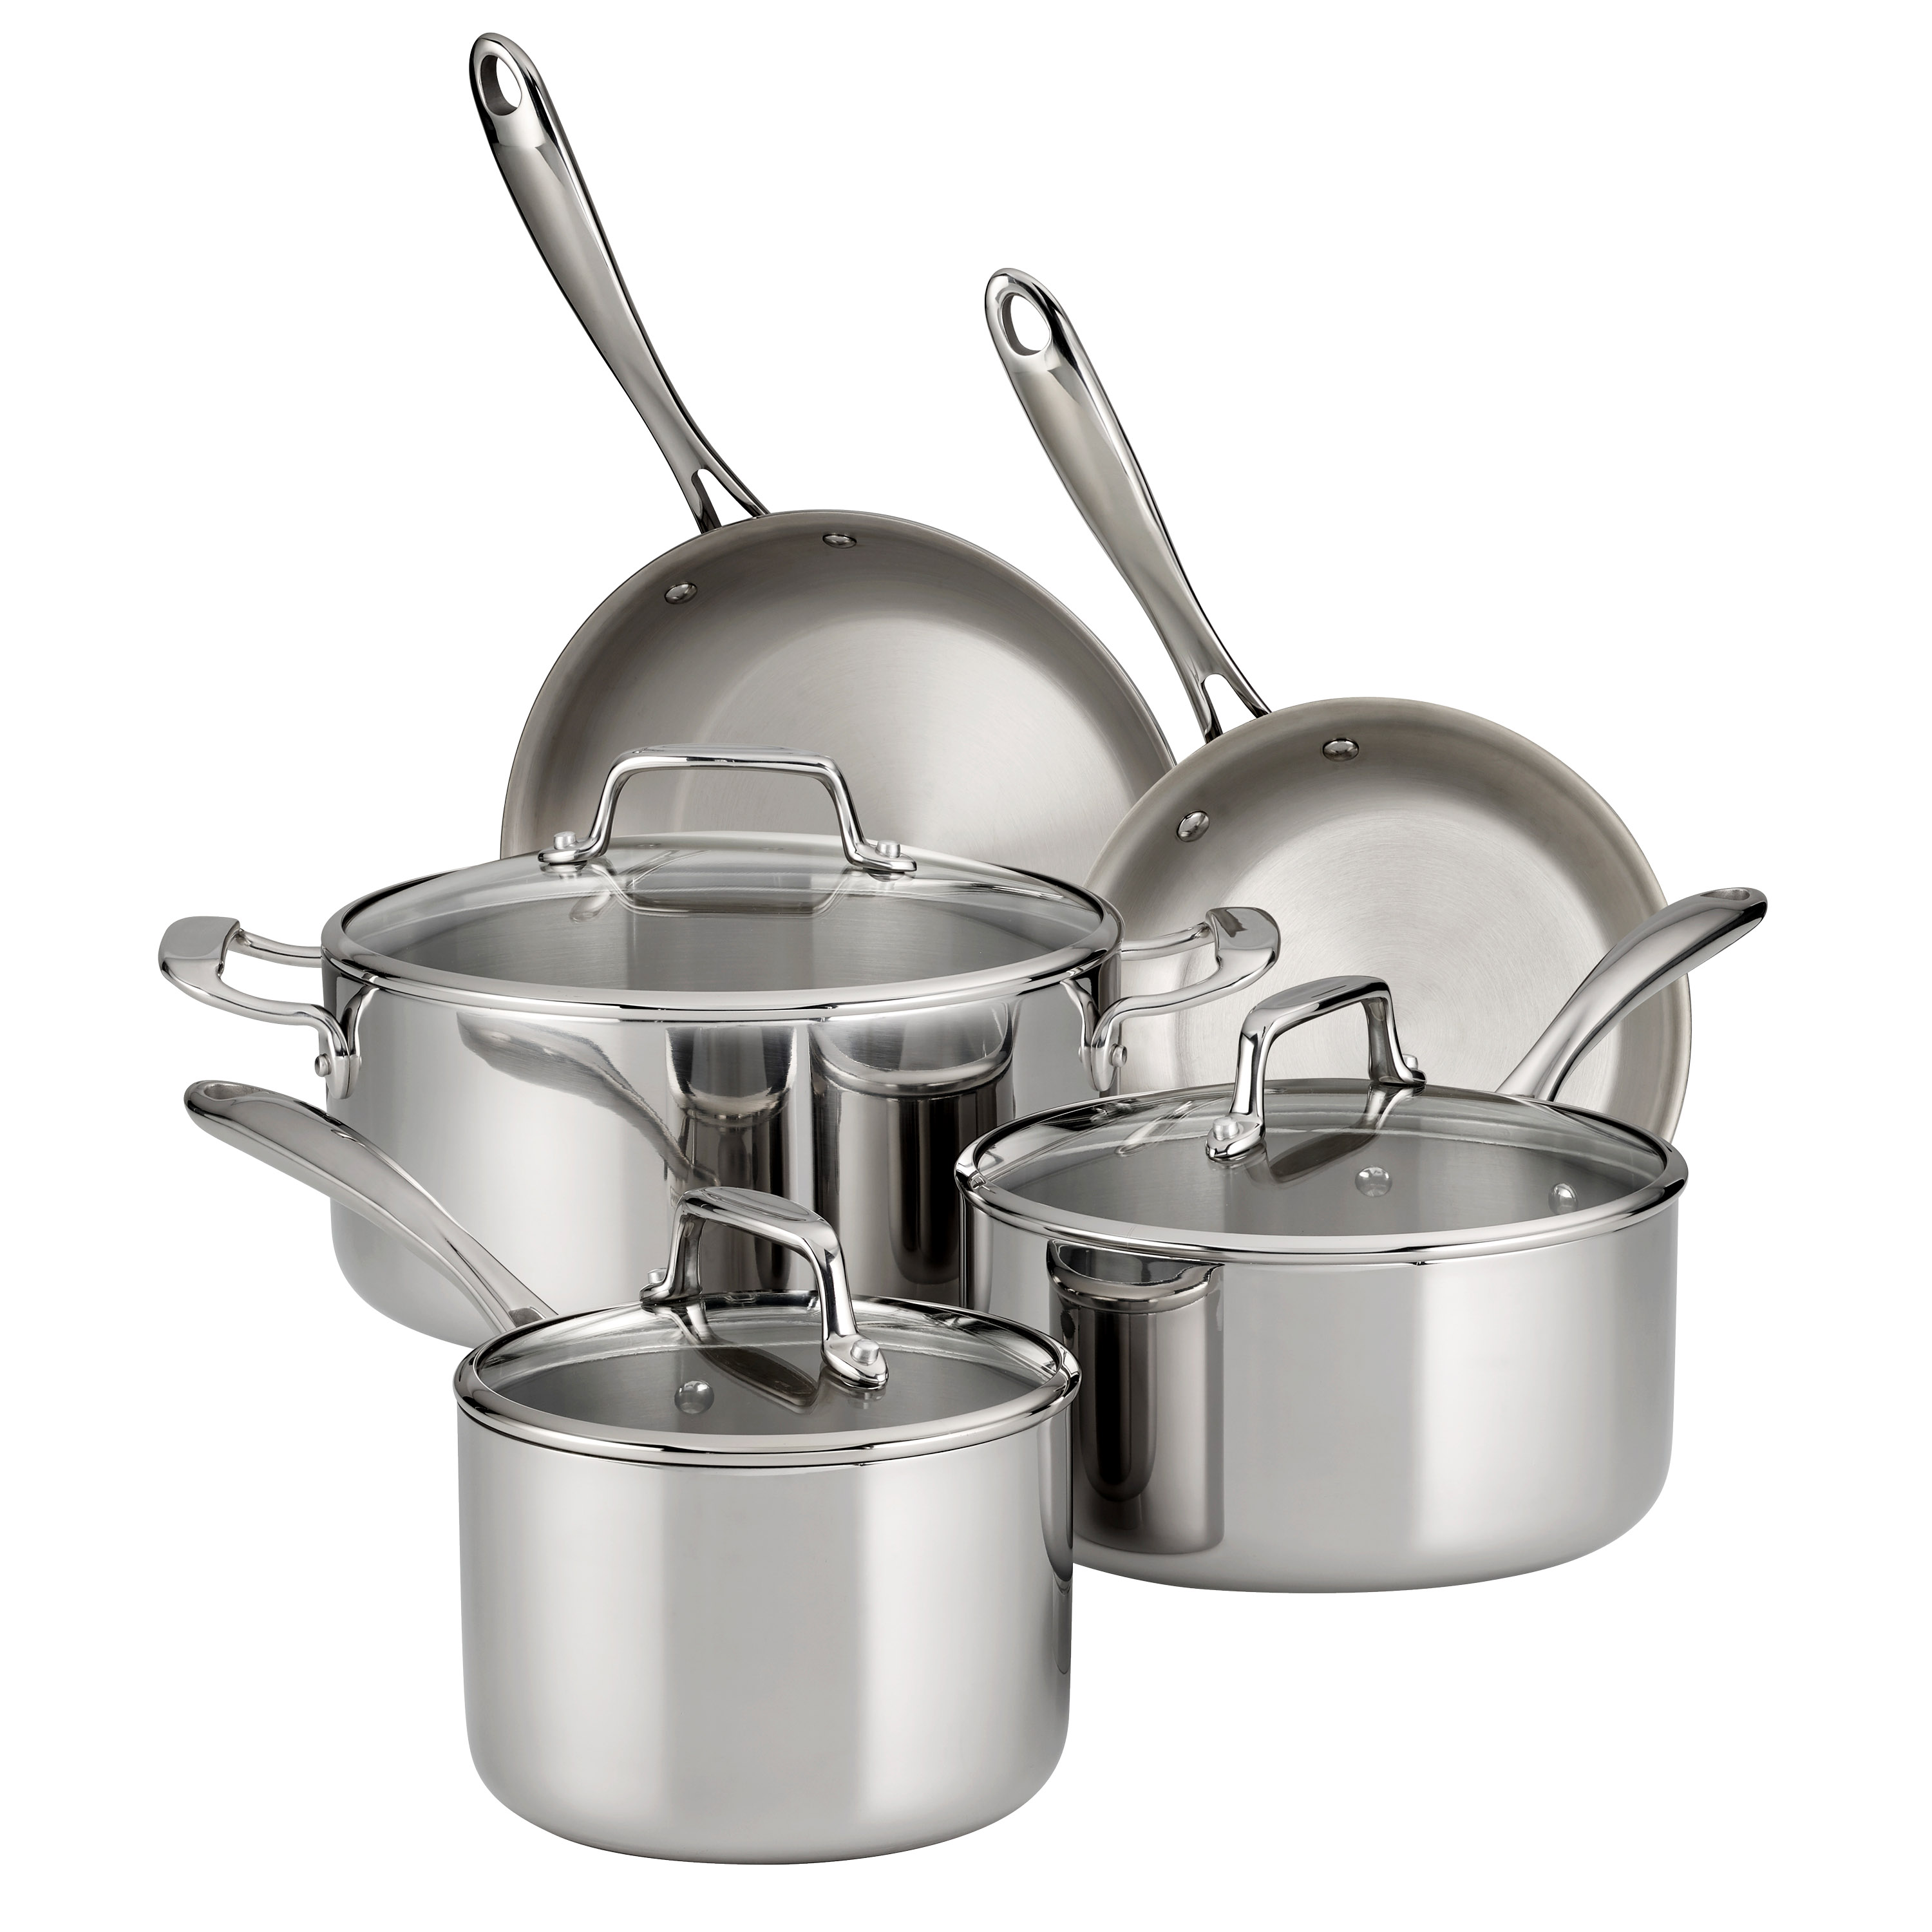 Tramontina 8 Pc Tri-Ply Clad Stainless Steel Cookware Set with Glass Lids - image 1 of 15